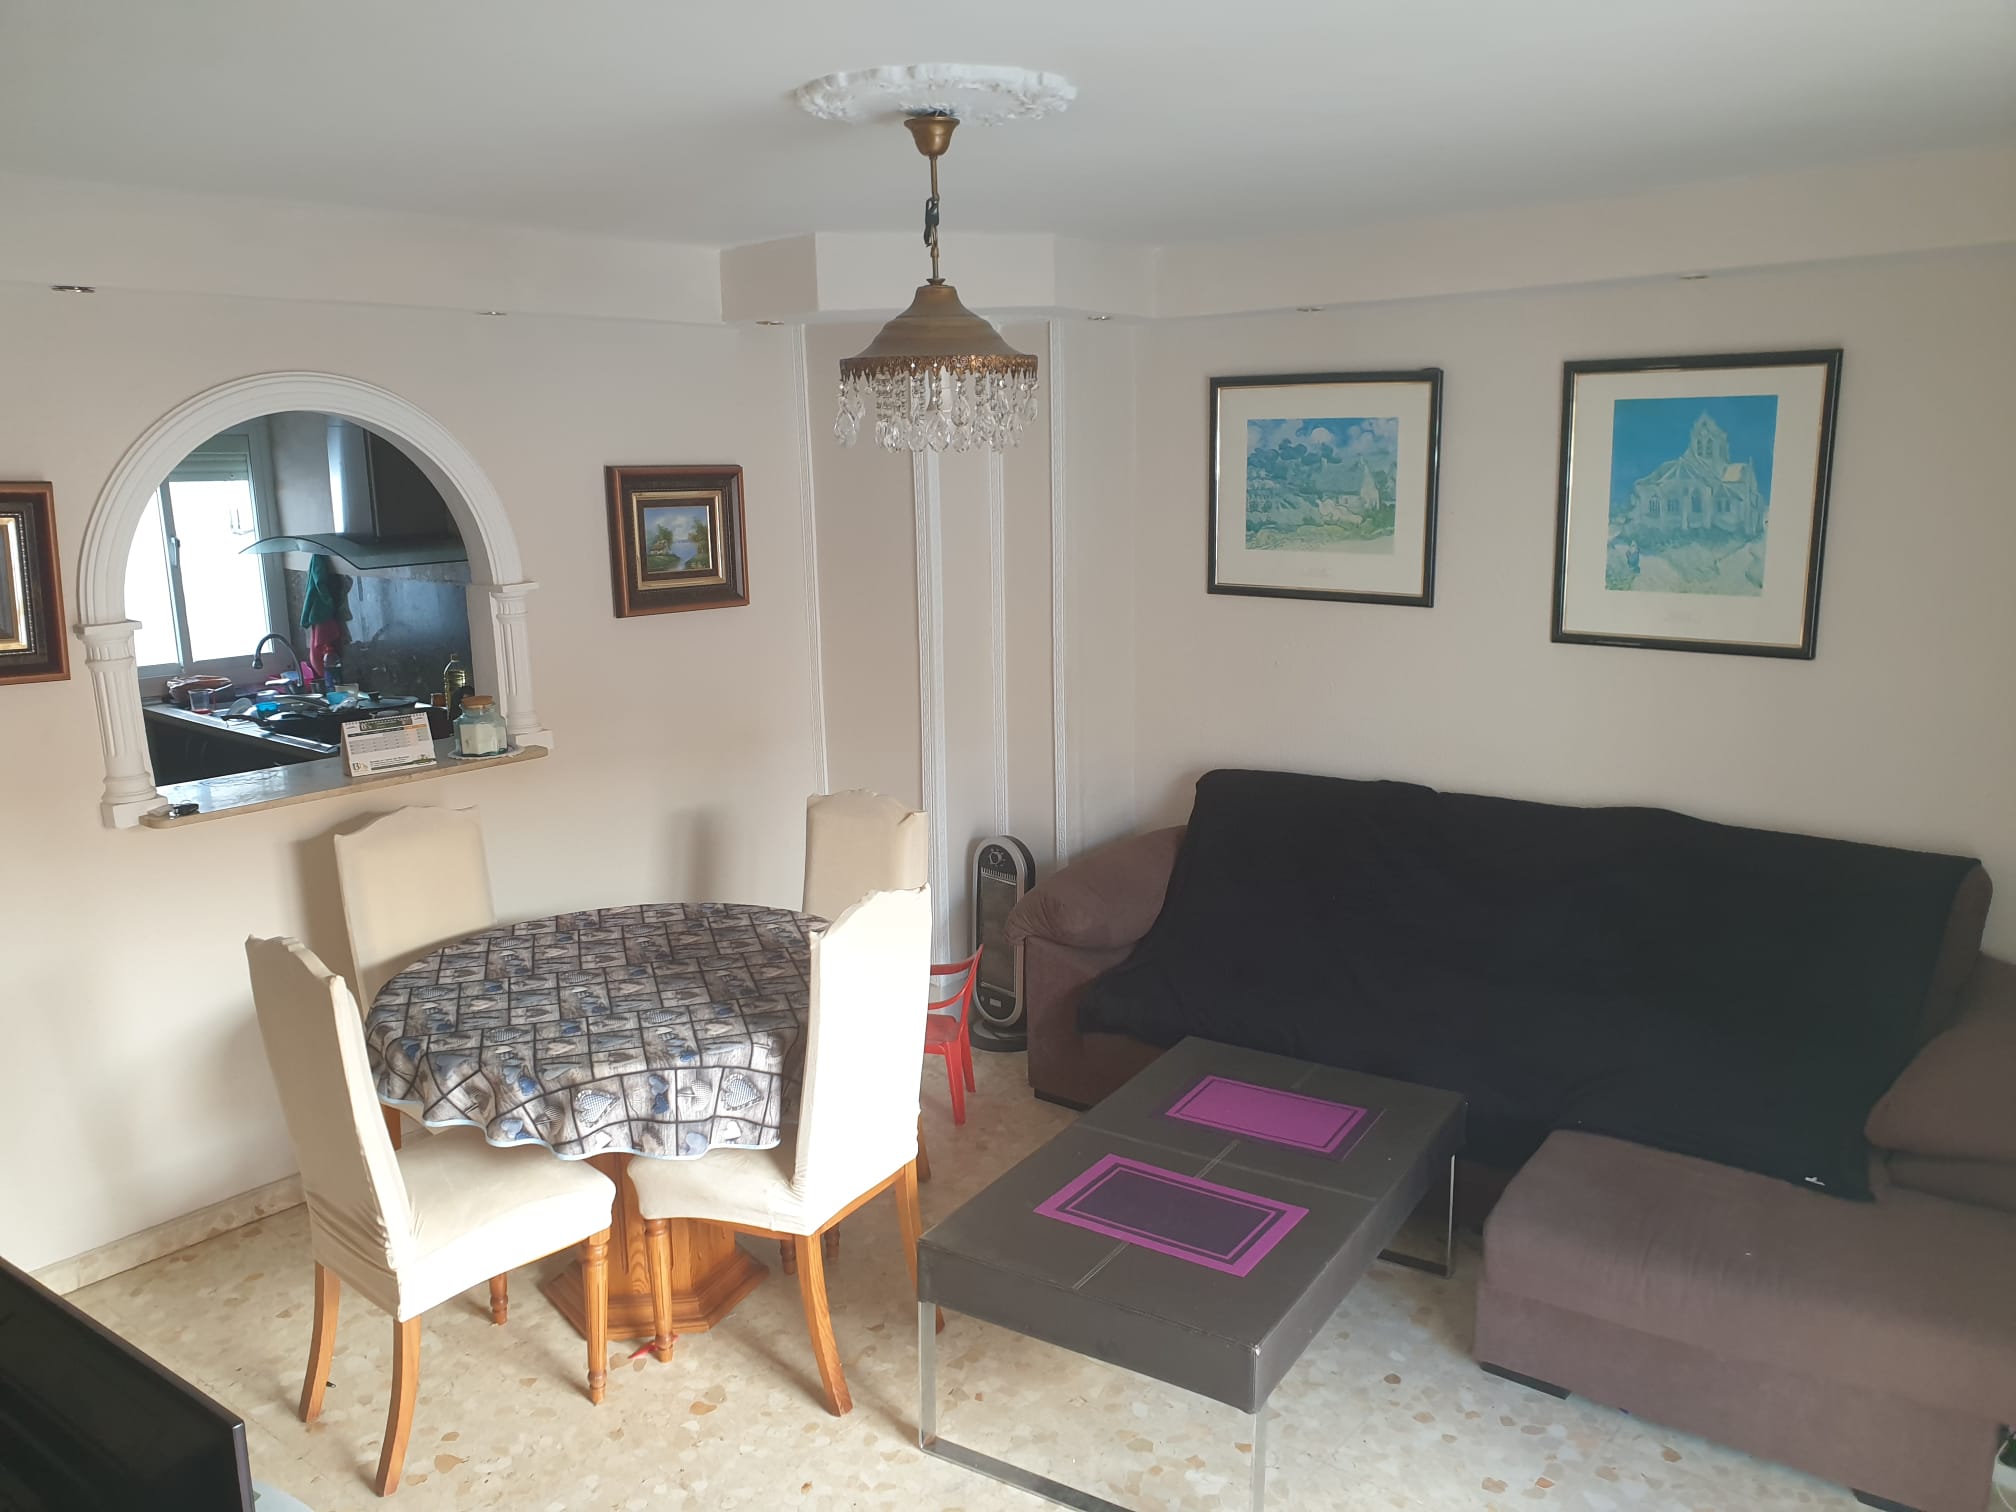 3 bedroom duplex penthouse for rent in the center of Estepona - mibgroup.es